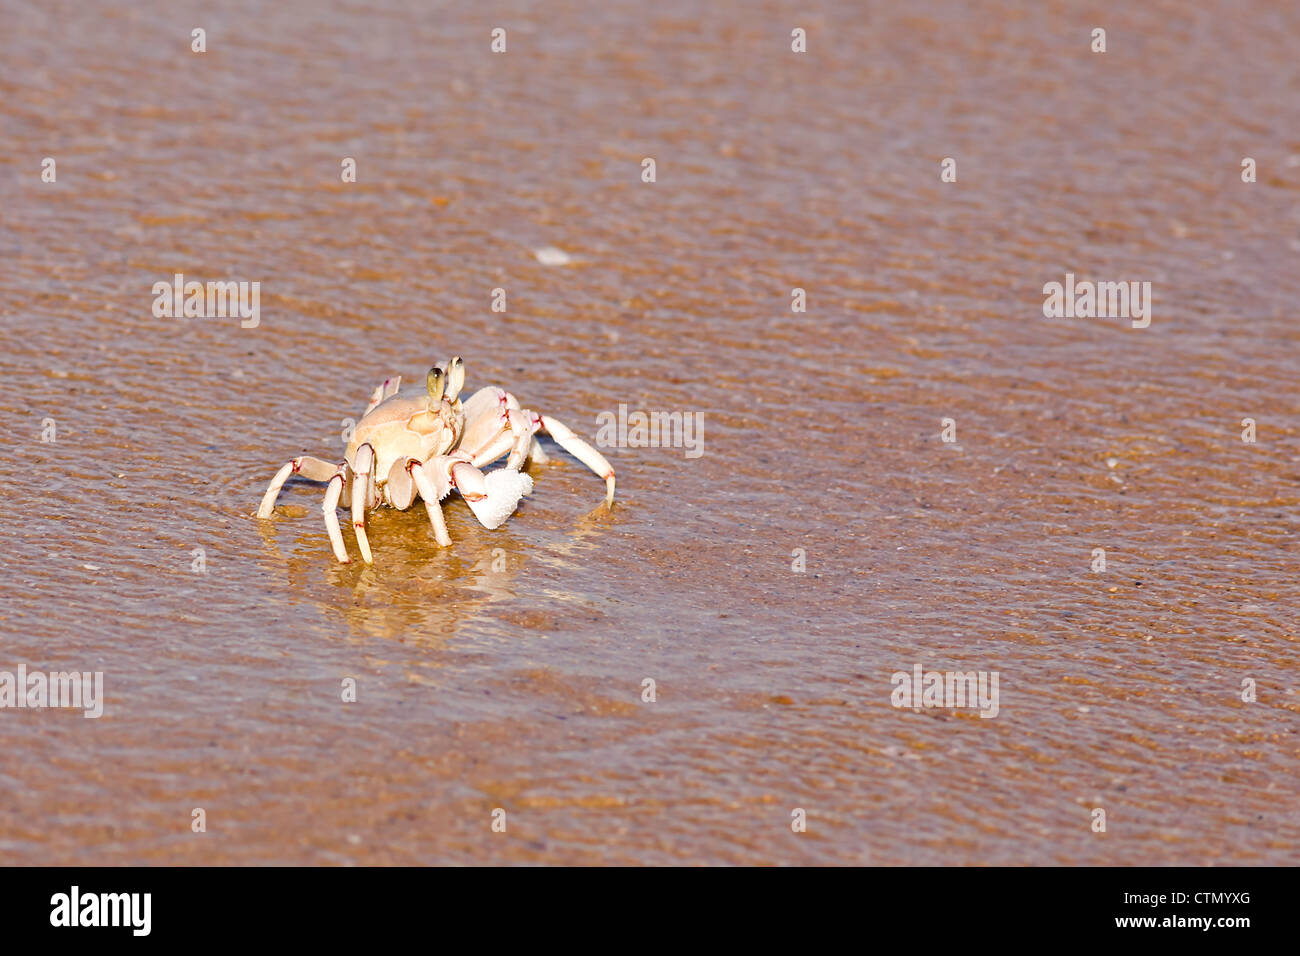 Ghost crab (Ocypode ryderi) in the inter tidal zone on the beach at Sodwana Bay, KwaZulu Natal, South Africa. Stock Photo